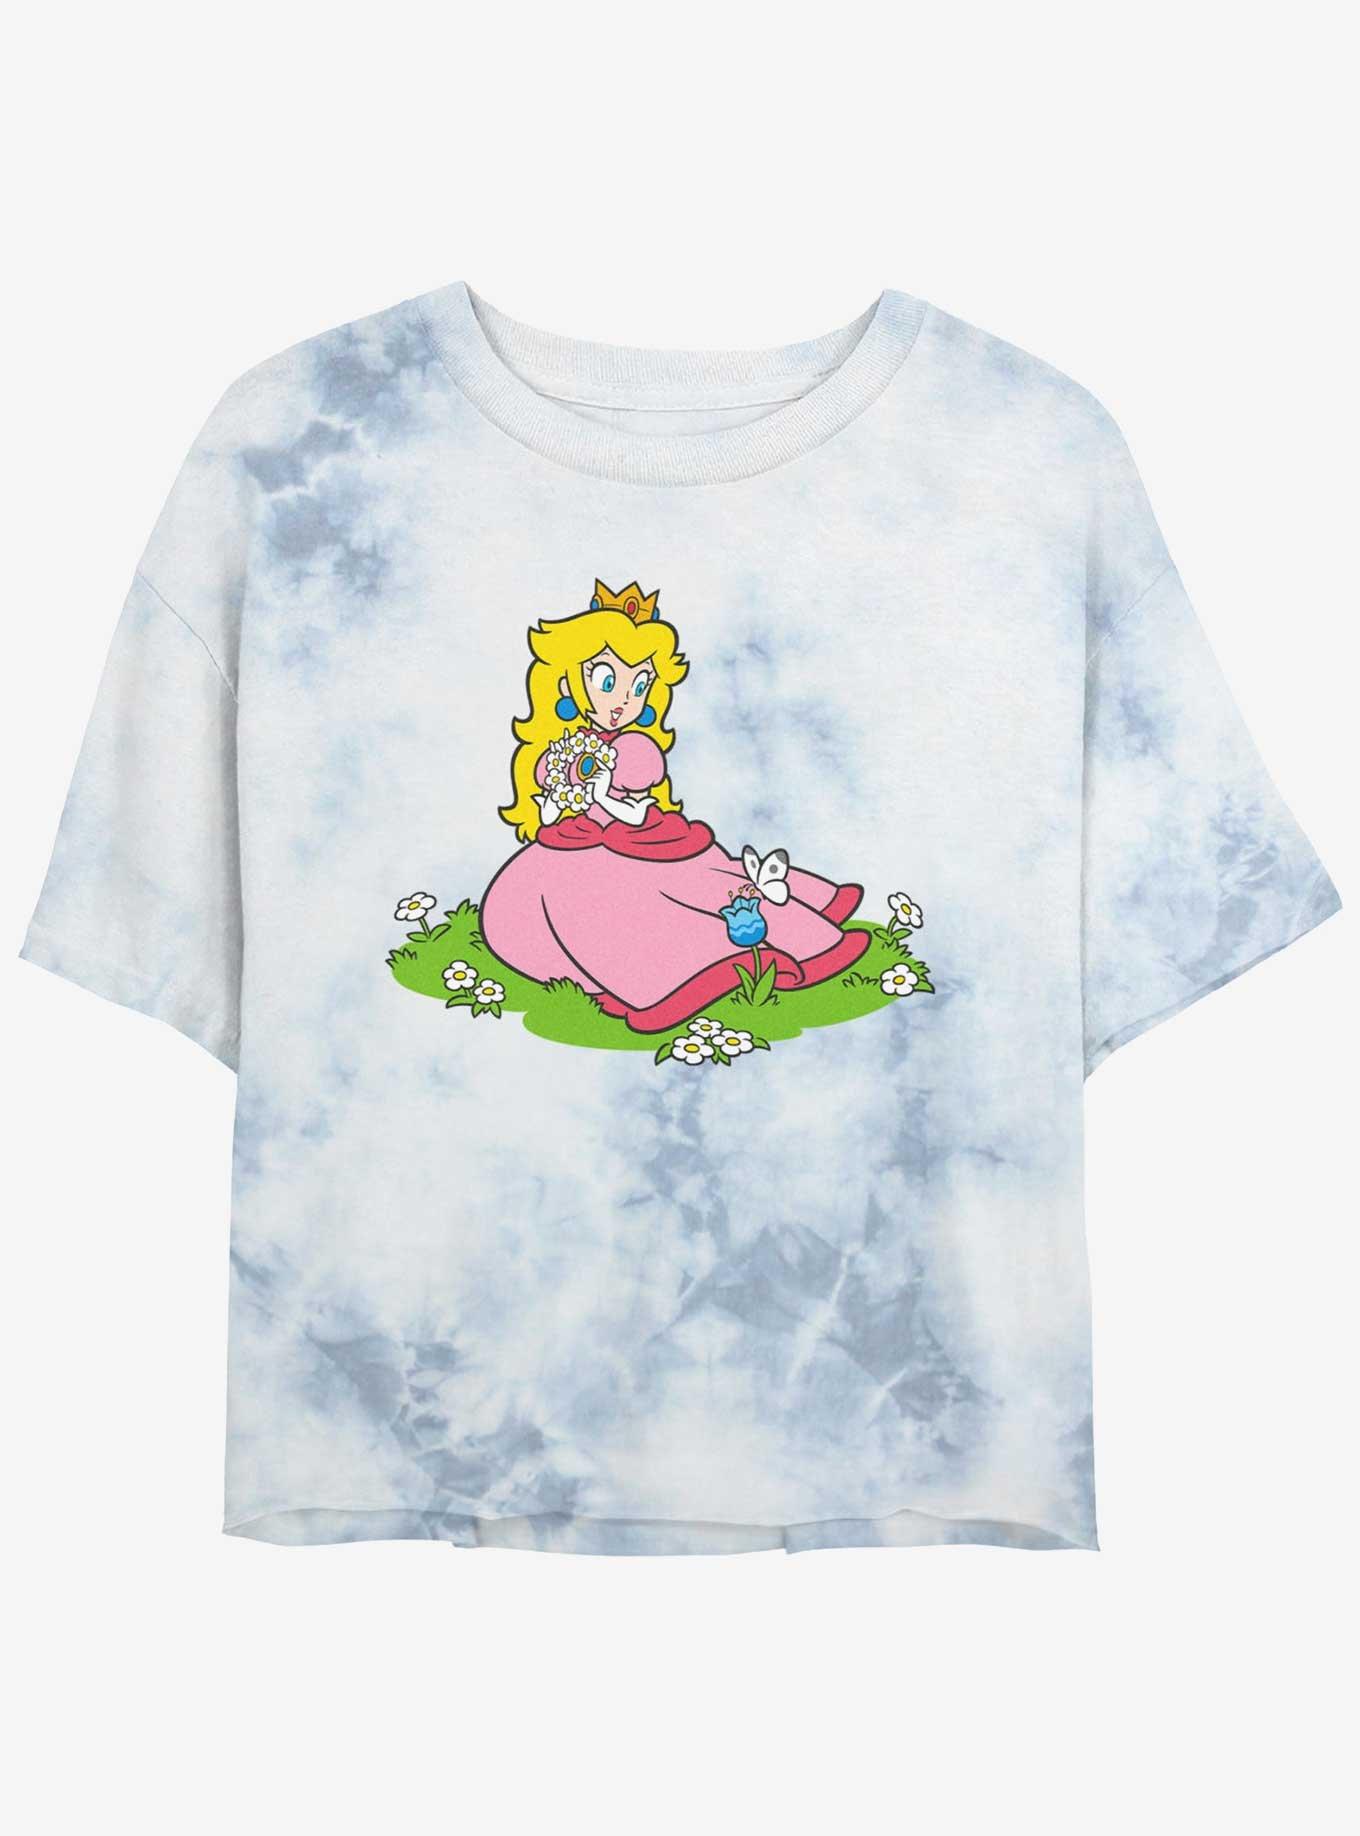 Nintendo Peach And A Butterfly Tie-Dye T-Shirt, WHITEBLUE, hi-res